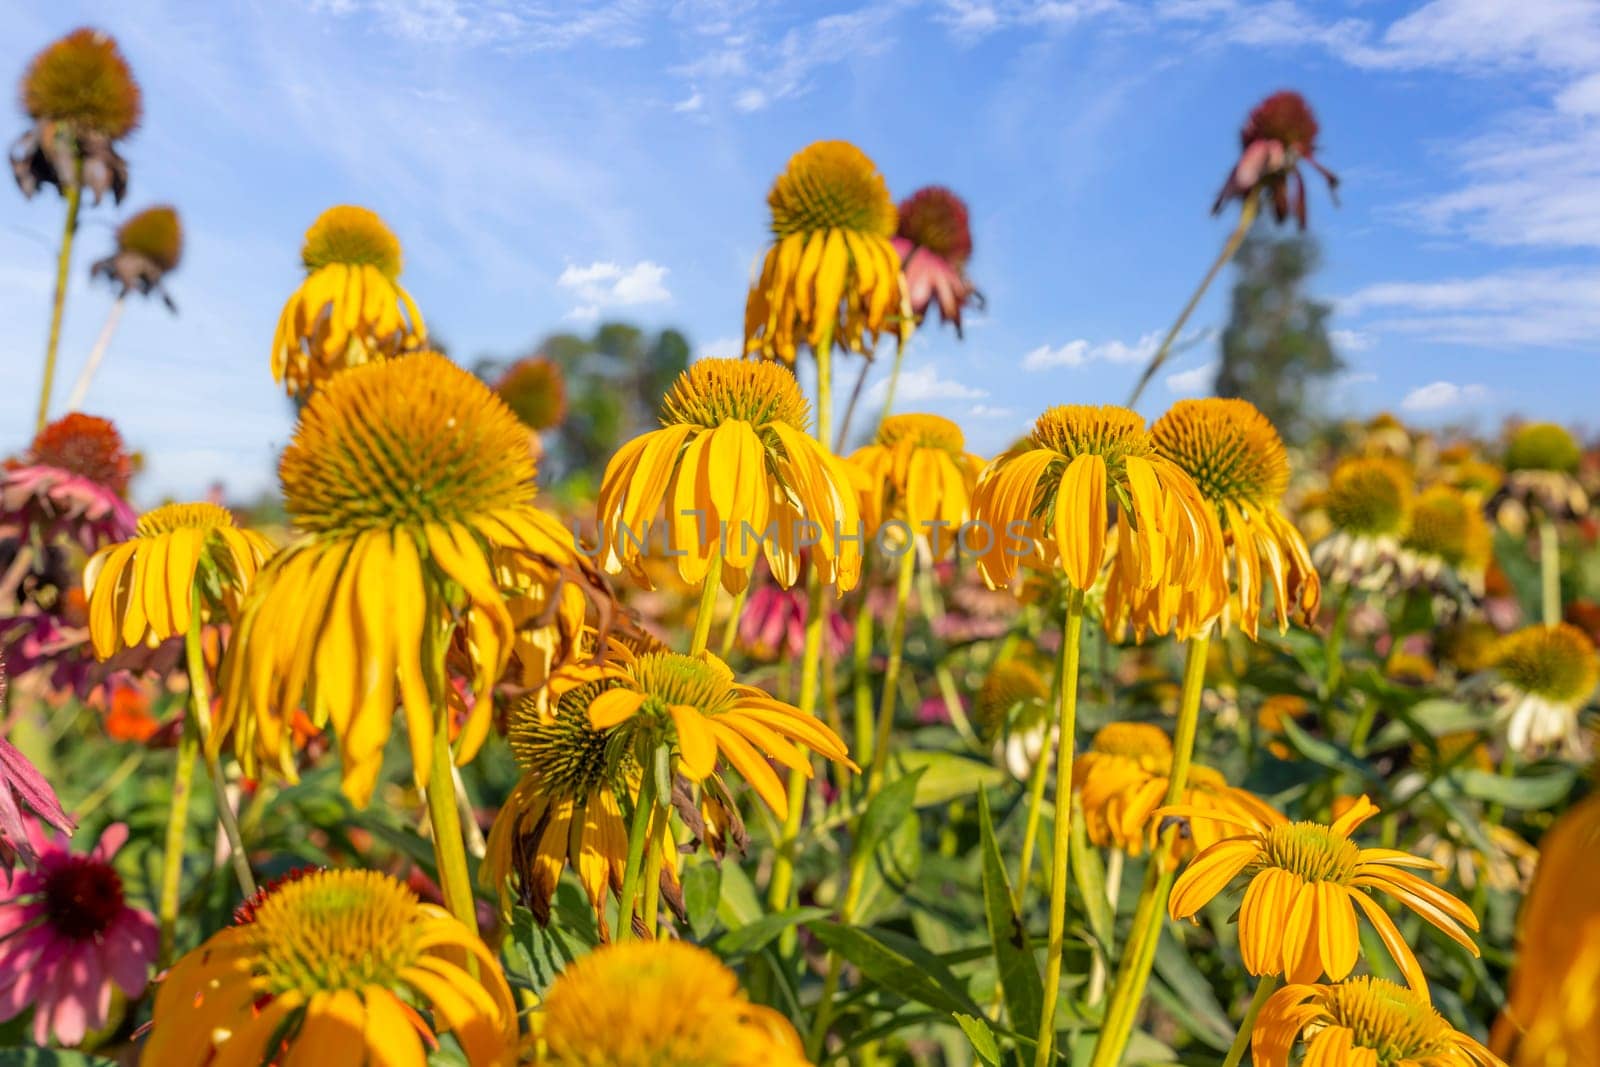 The bright yellow flowers of Echinacea purpurea 'Sombrero Yellow', in close up, in a natural outdoor setting. Cone flower. by Gamjai